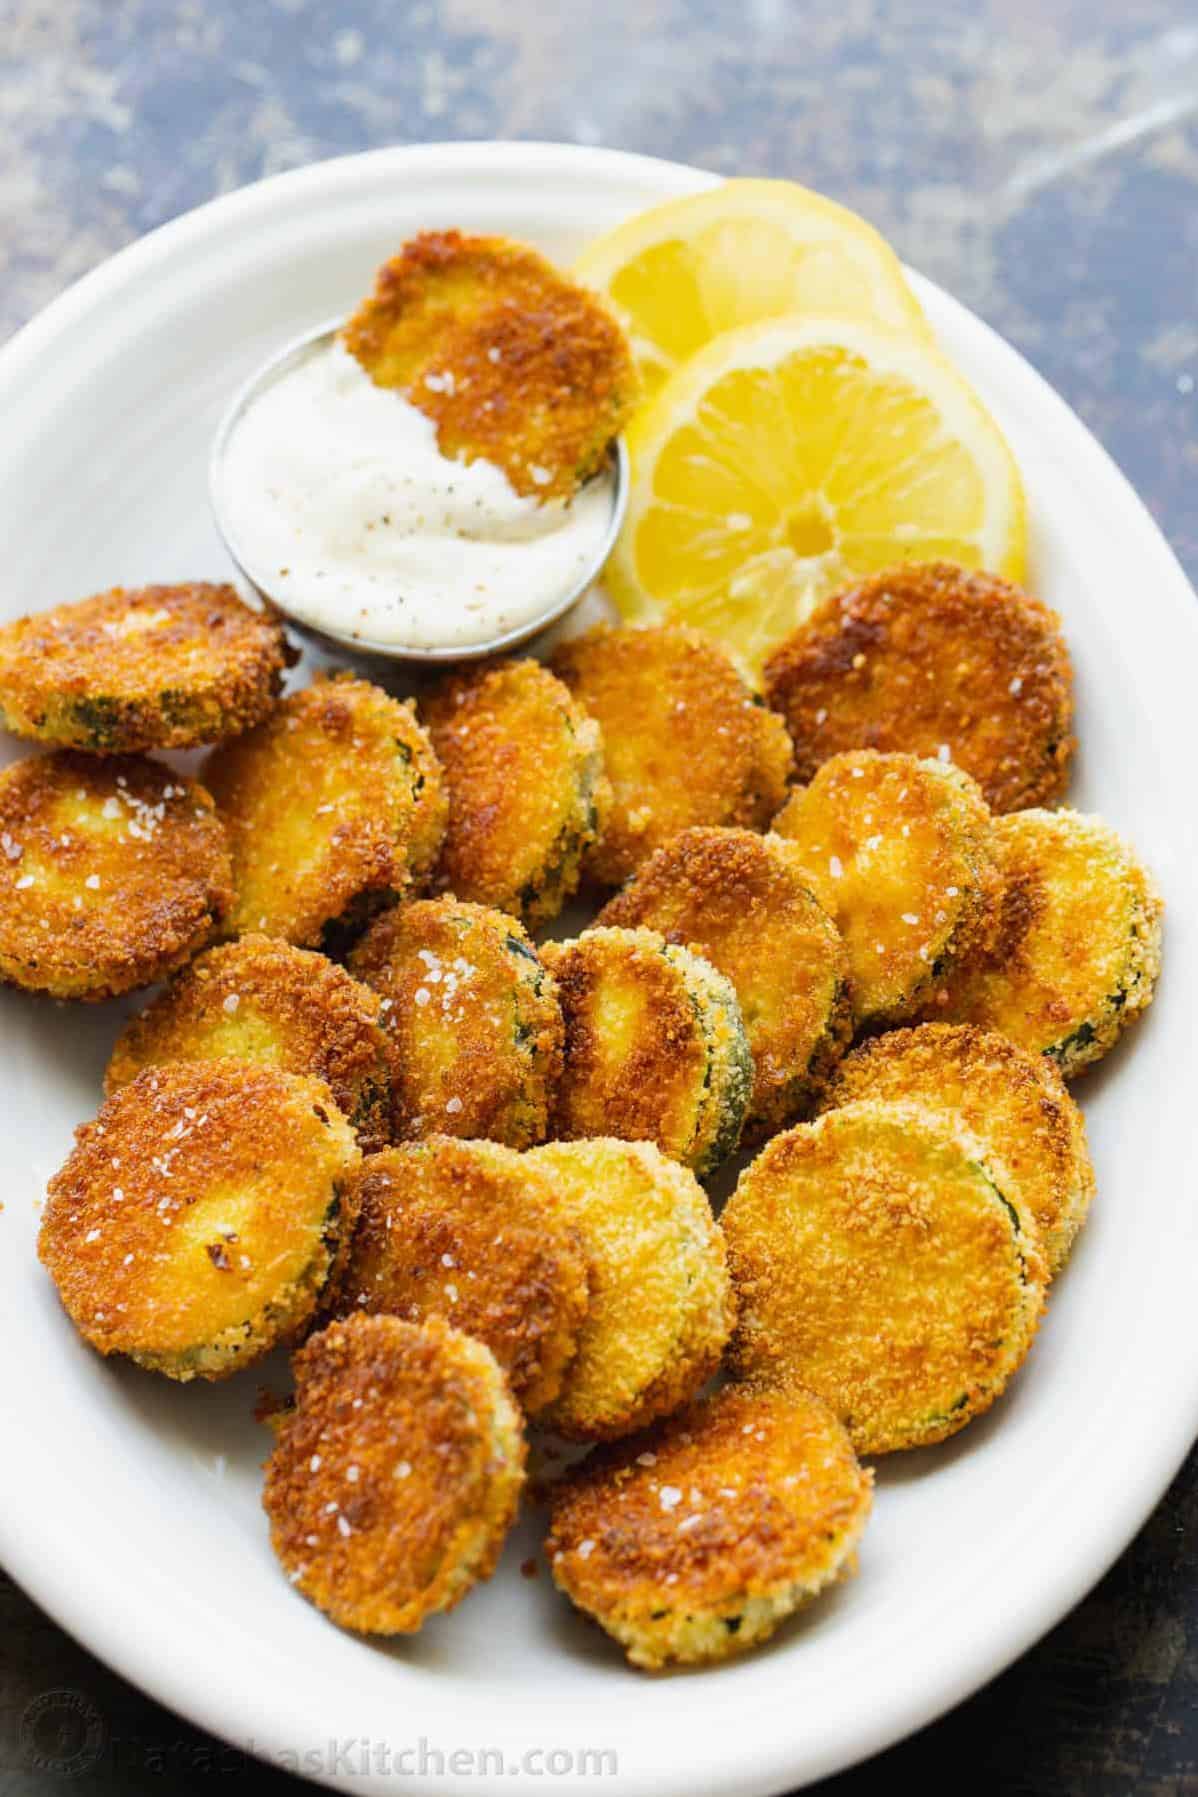  Move over, potato chips. These fried zucchini slices are the new MVP of snack time.